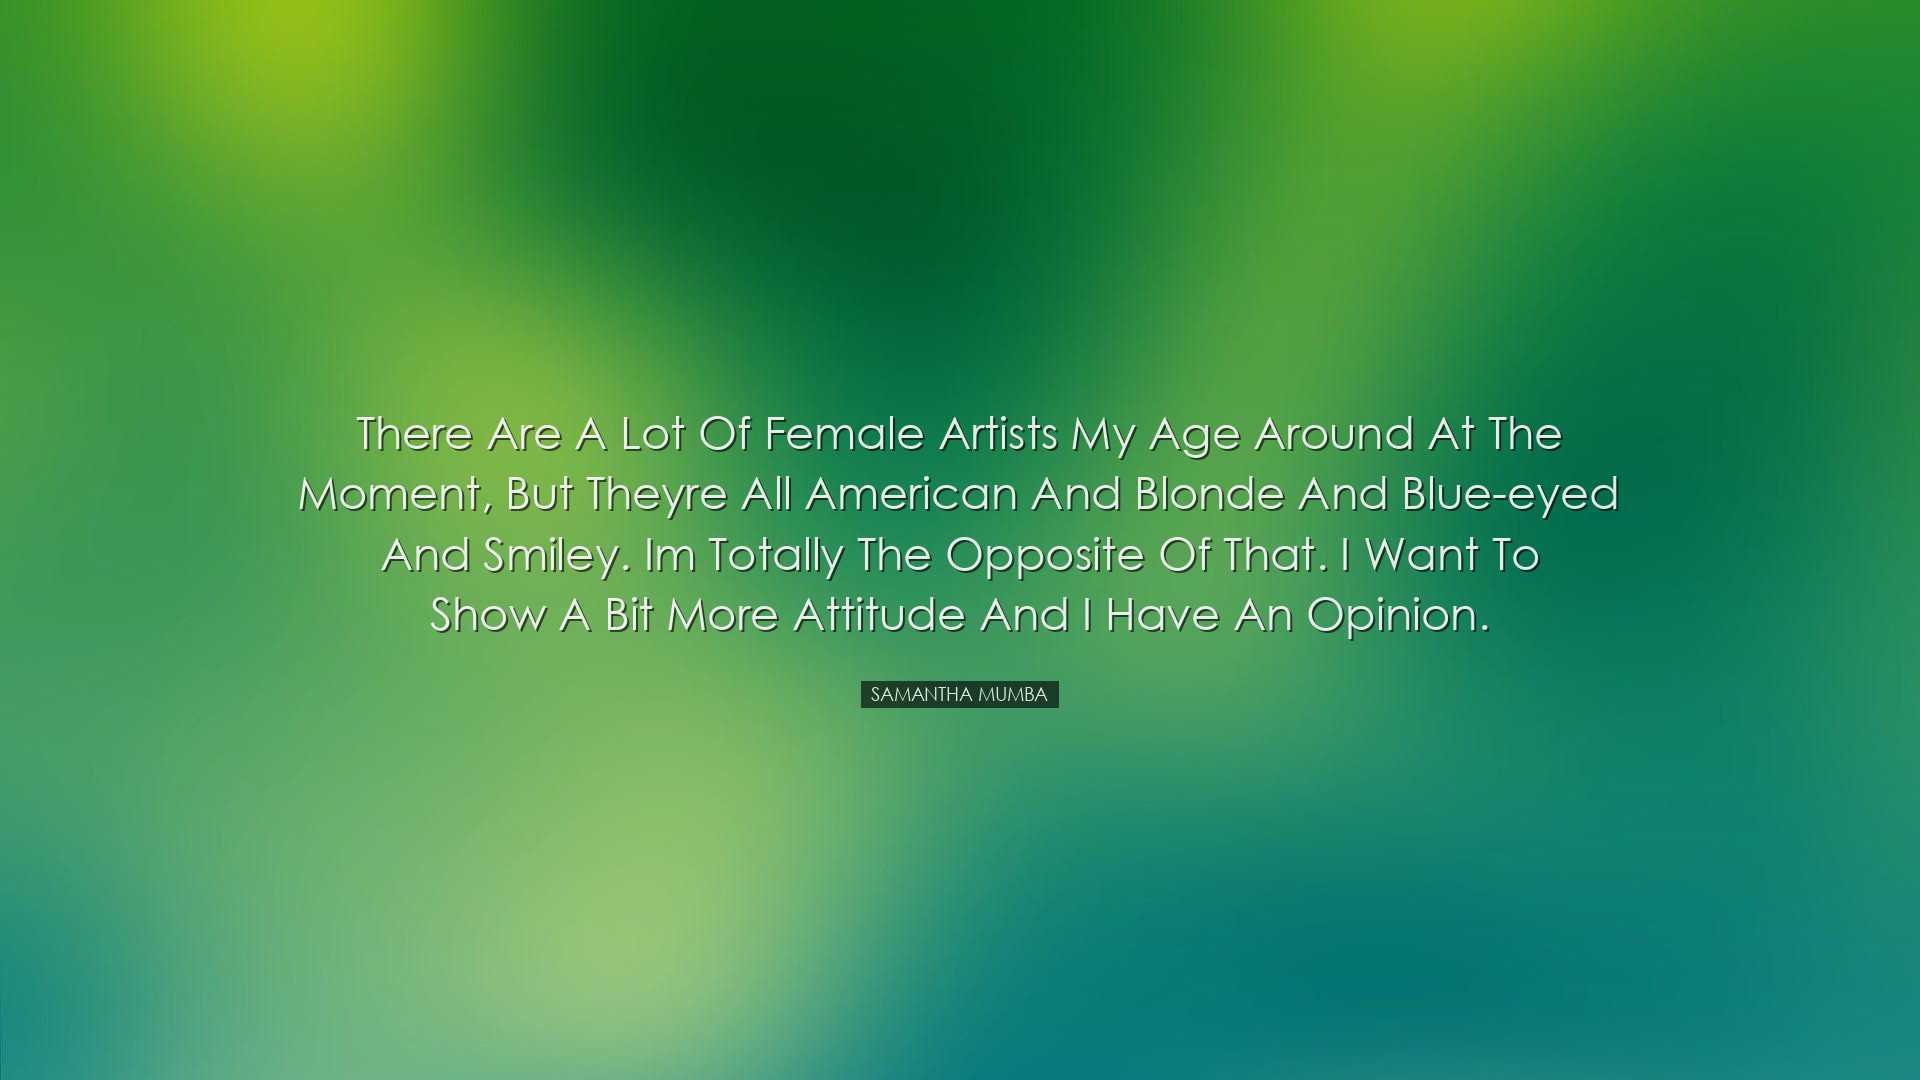 There are a lot of female artists my age around at the moment, but